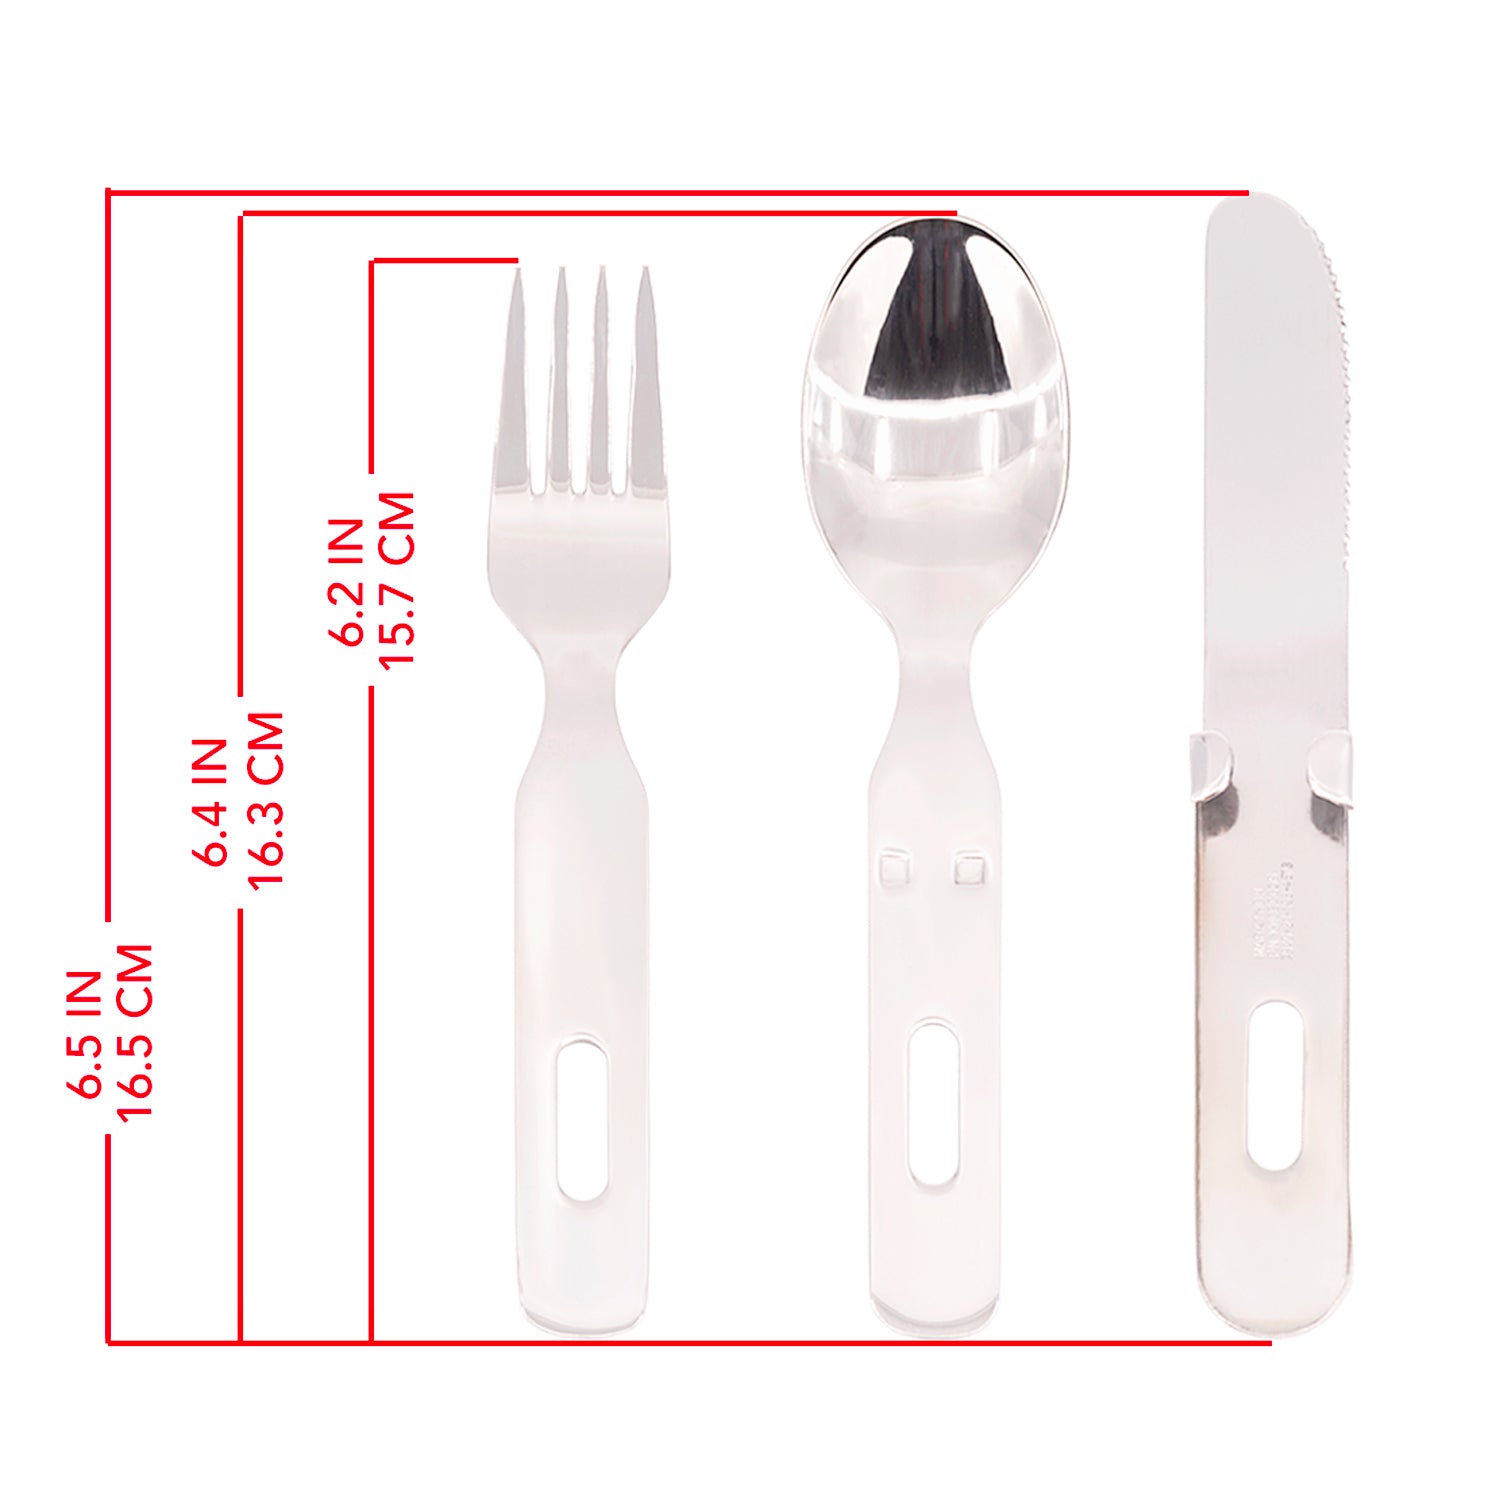 Knife, Fork and Spoon Set - Chow Kit - Military, Hiking, Camping, & Emergency Kit - marathonwatch